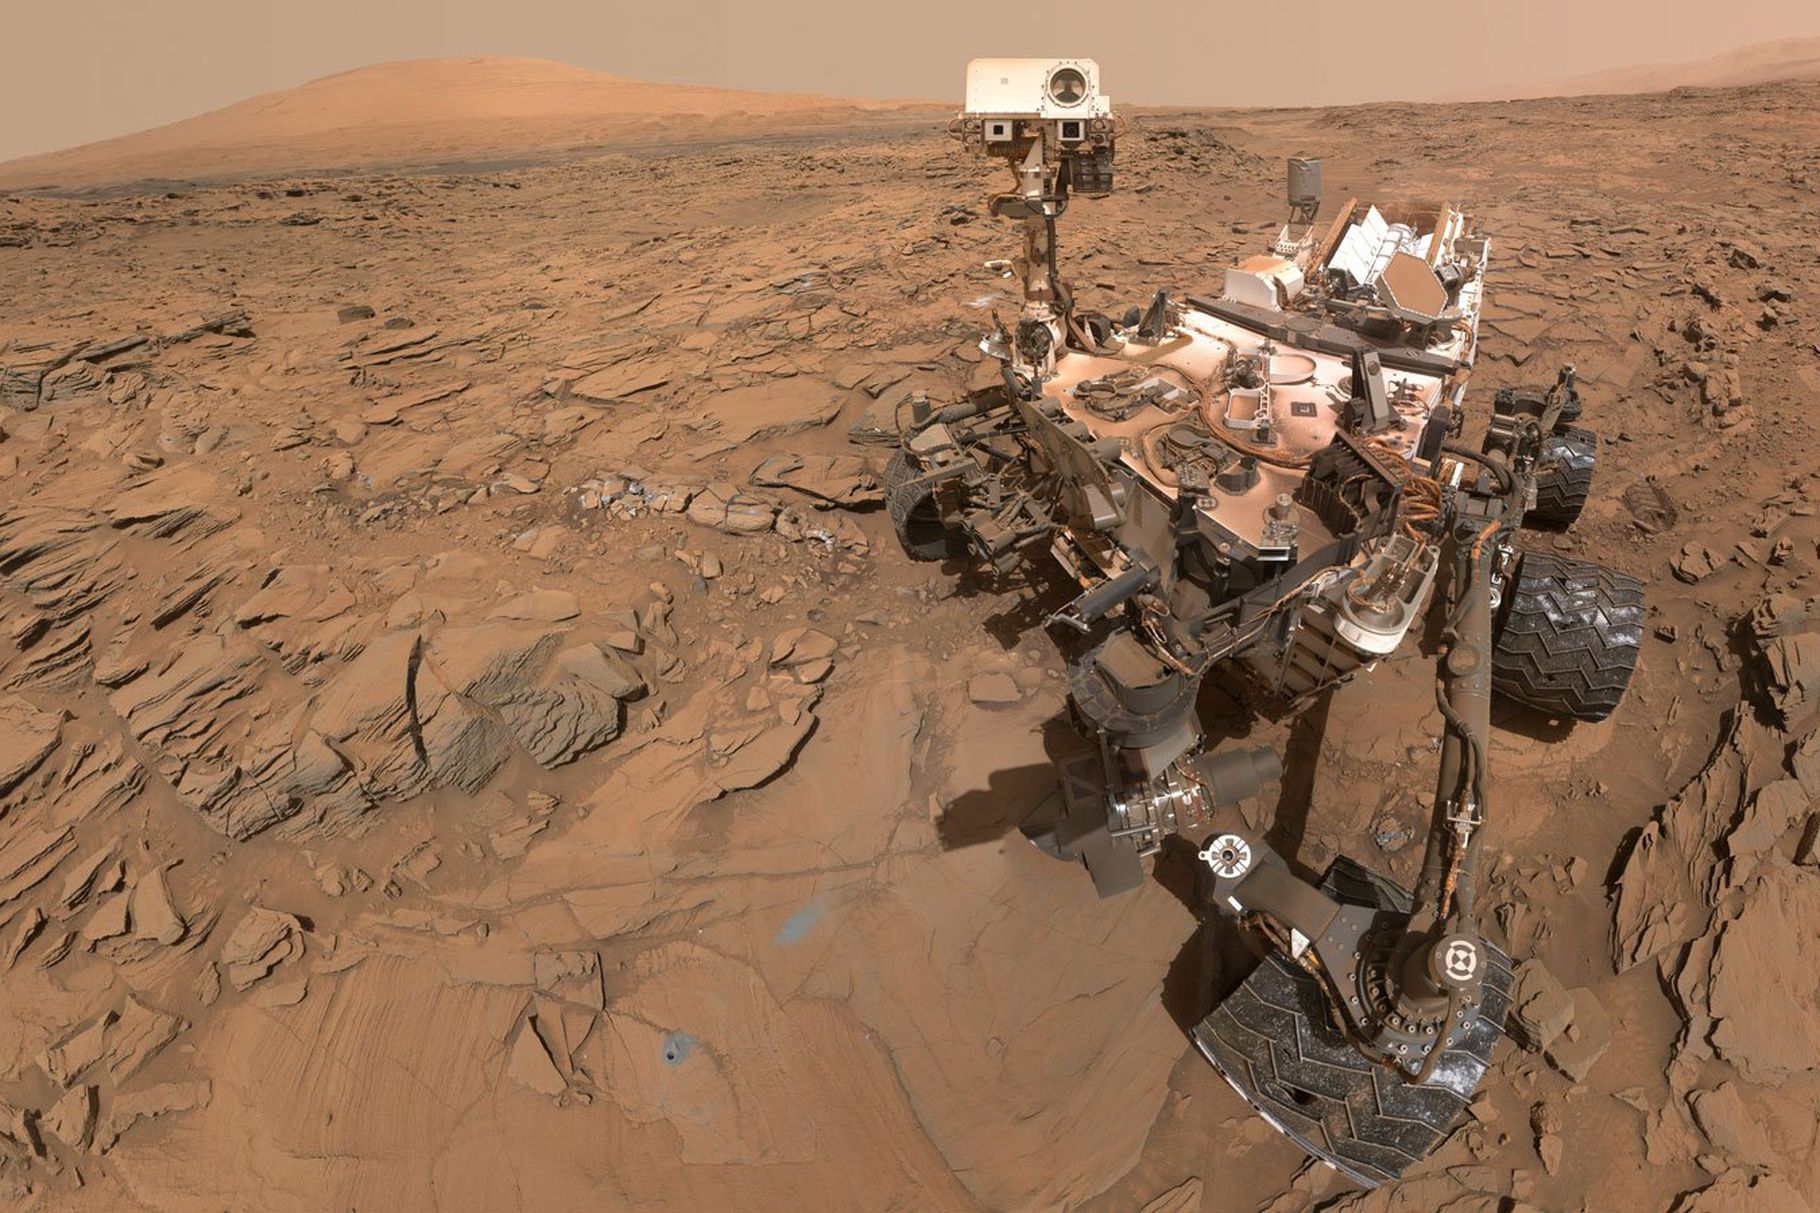 NASA's Curiosity rover has resumed full operations after software scare